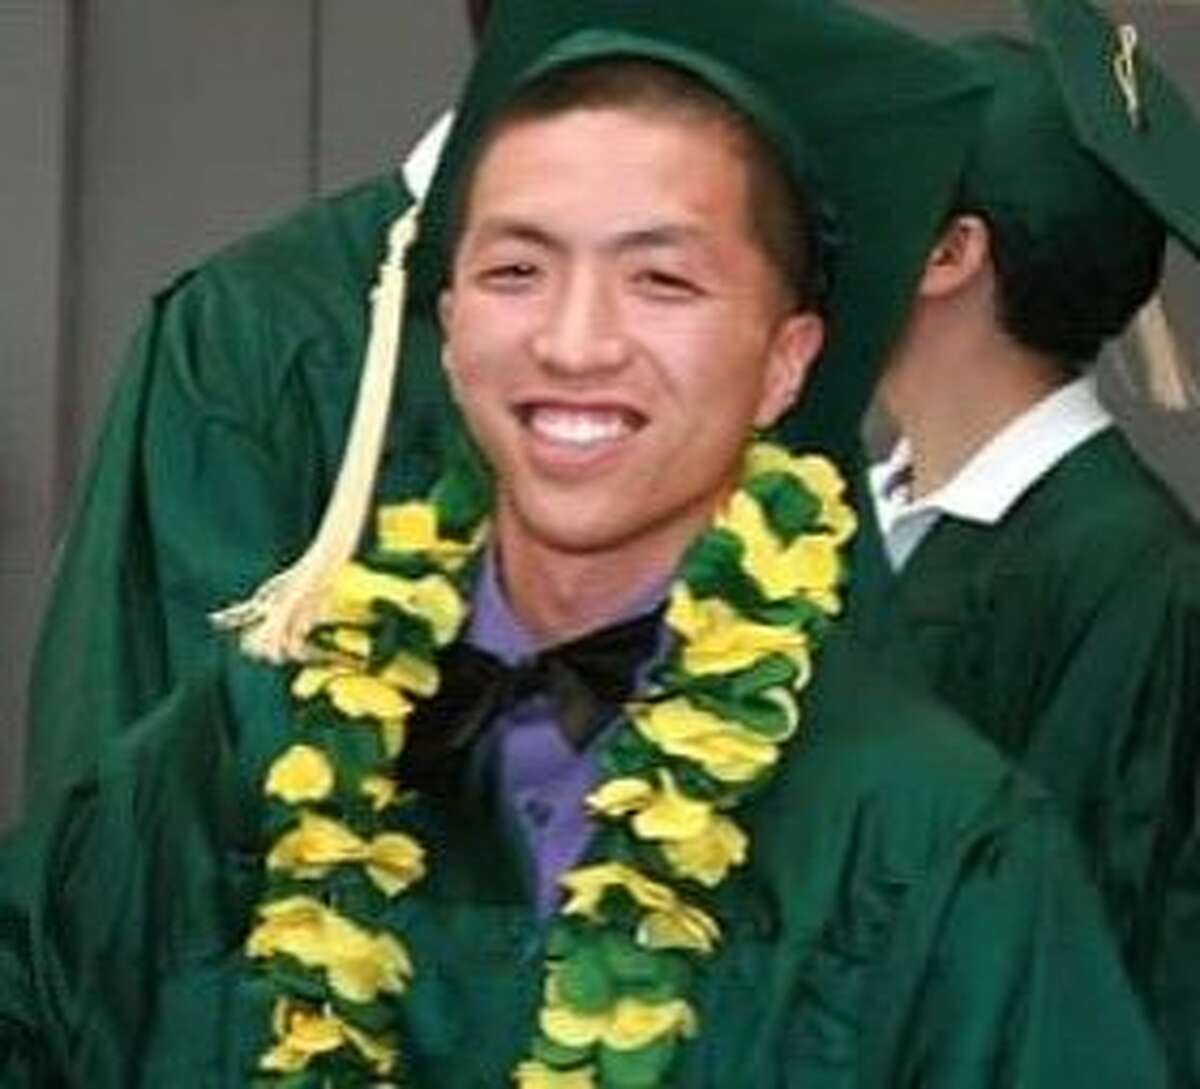 Aya Nakano, 22, of Emeryville was shot dead after his car was rear-ended in North Oakland in 2013.